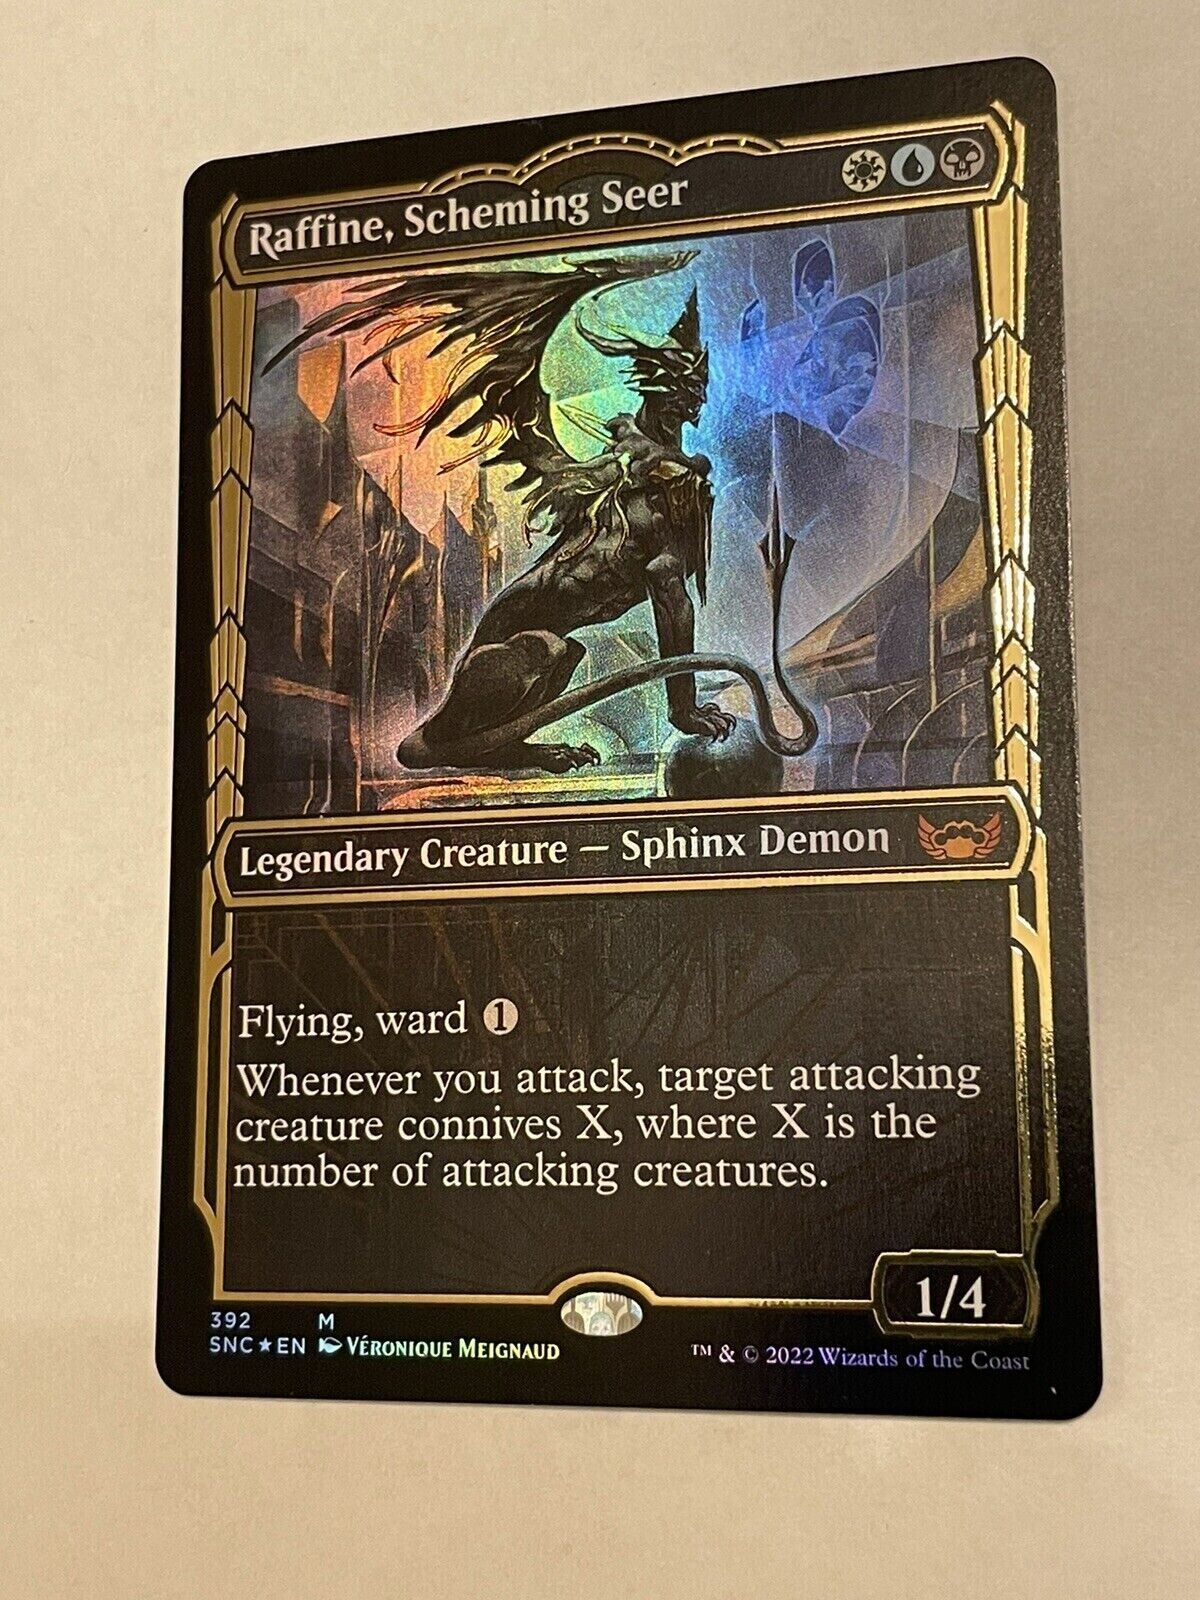 1x FOIL GILDED RAFFINE, SCHEMING SEER - Capenna - MTG - NM - Magic the Gathering